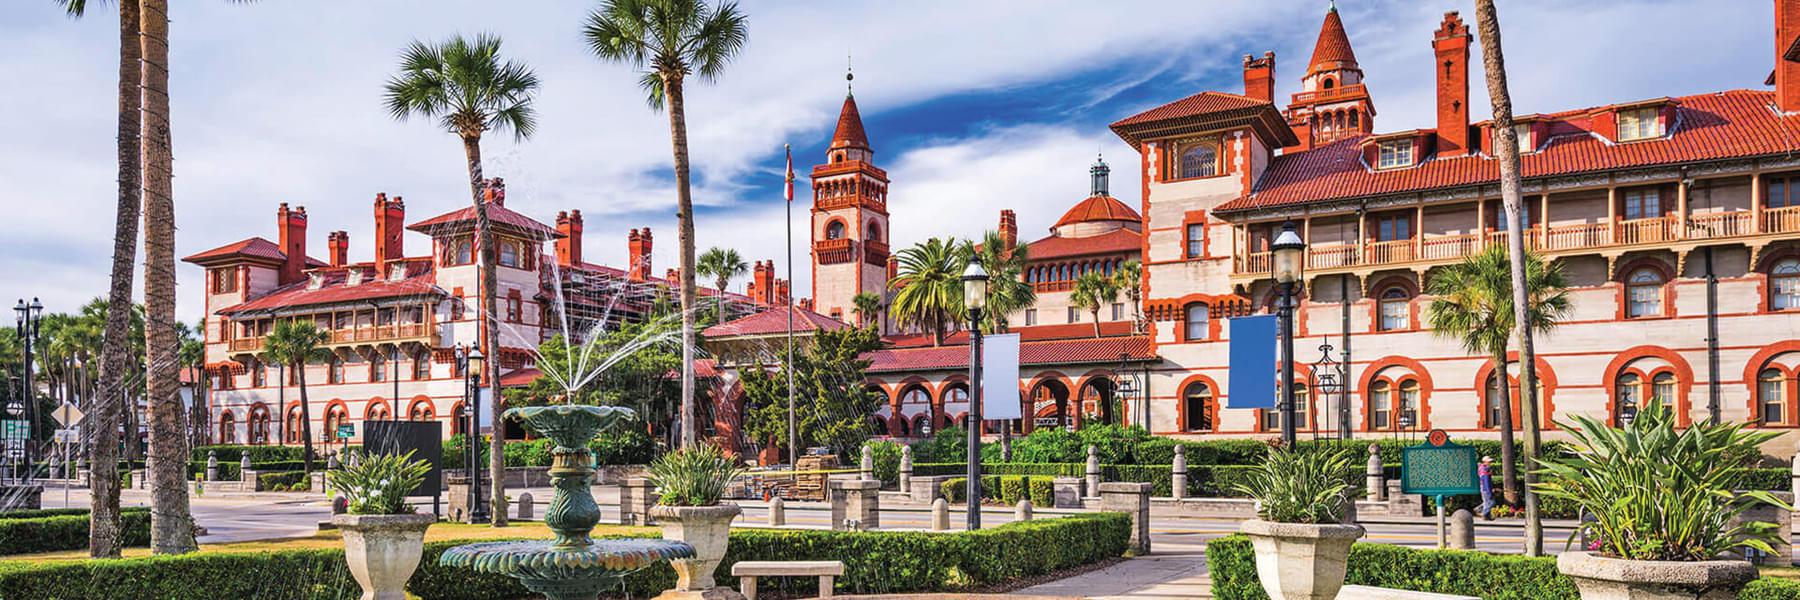 Marvel at the stunning colonial architecture of St. Augustine